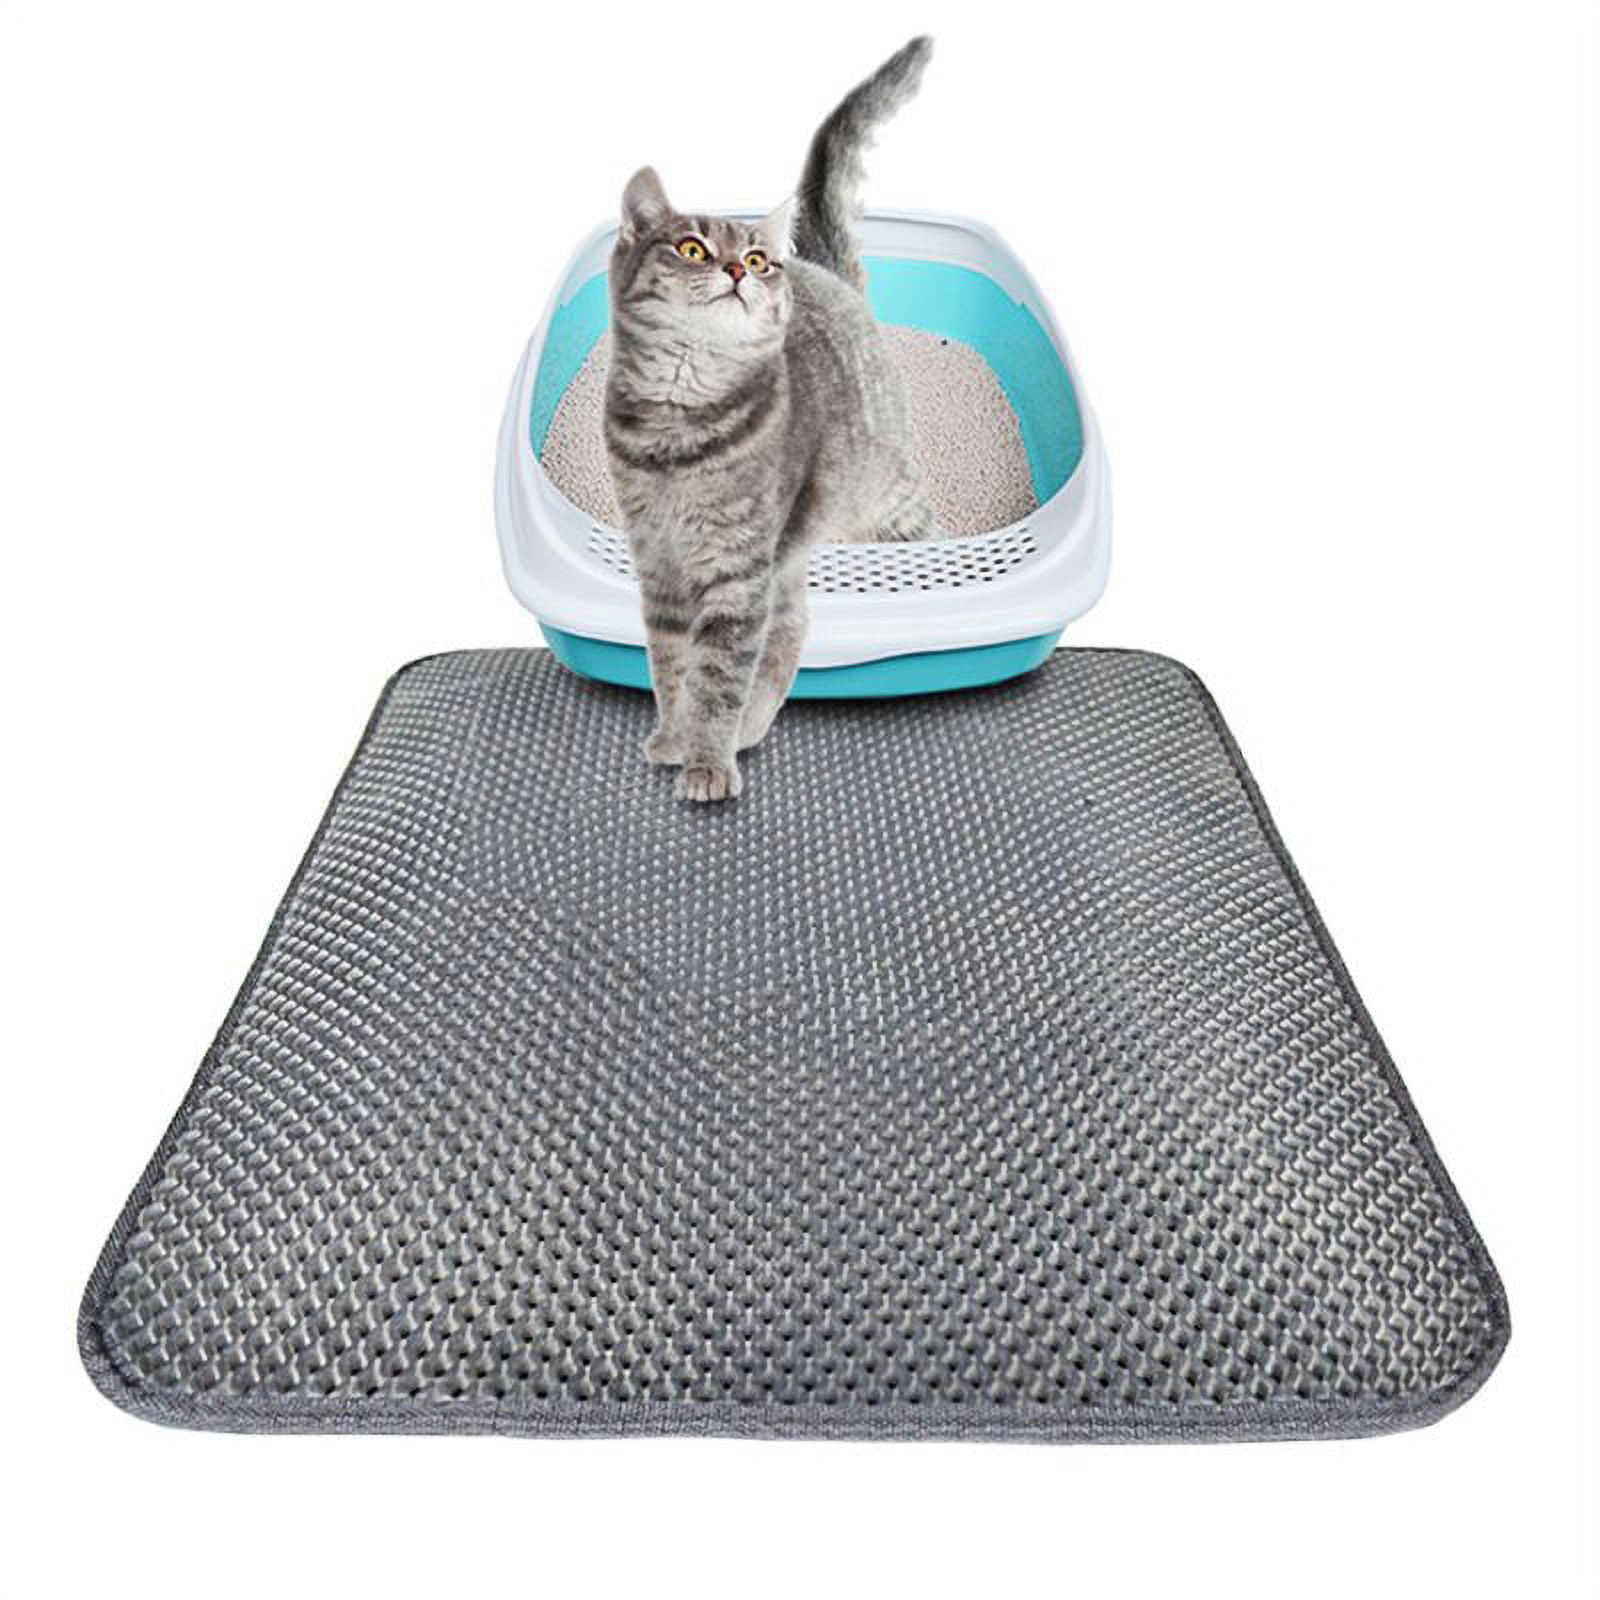 Cat Litter Mat, XL Super Size, Phthalate Free, Easy to Clean, 46x35 Inches,  Durable, Soft on Paws, Large Litter Mat.